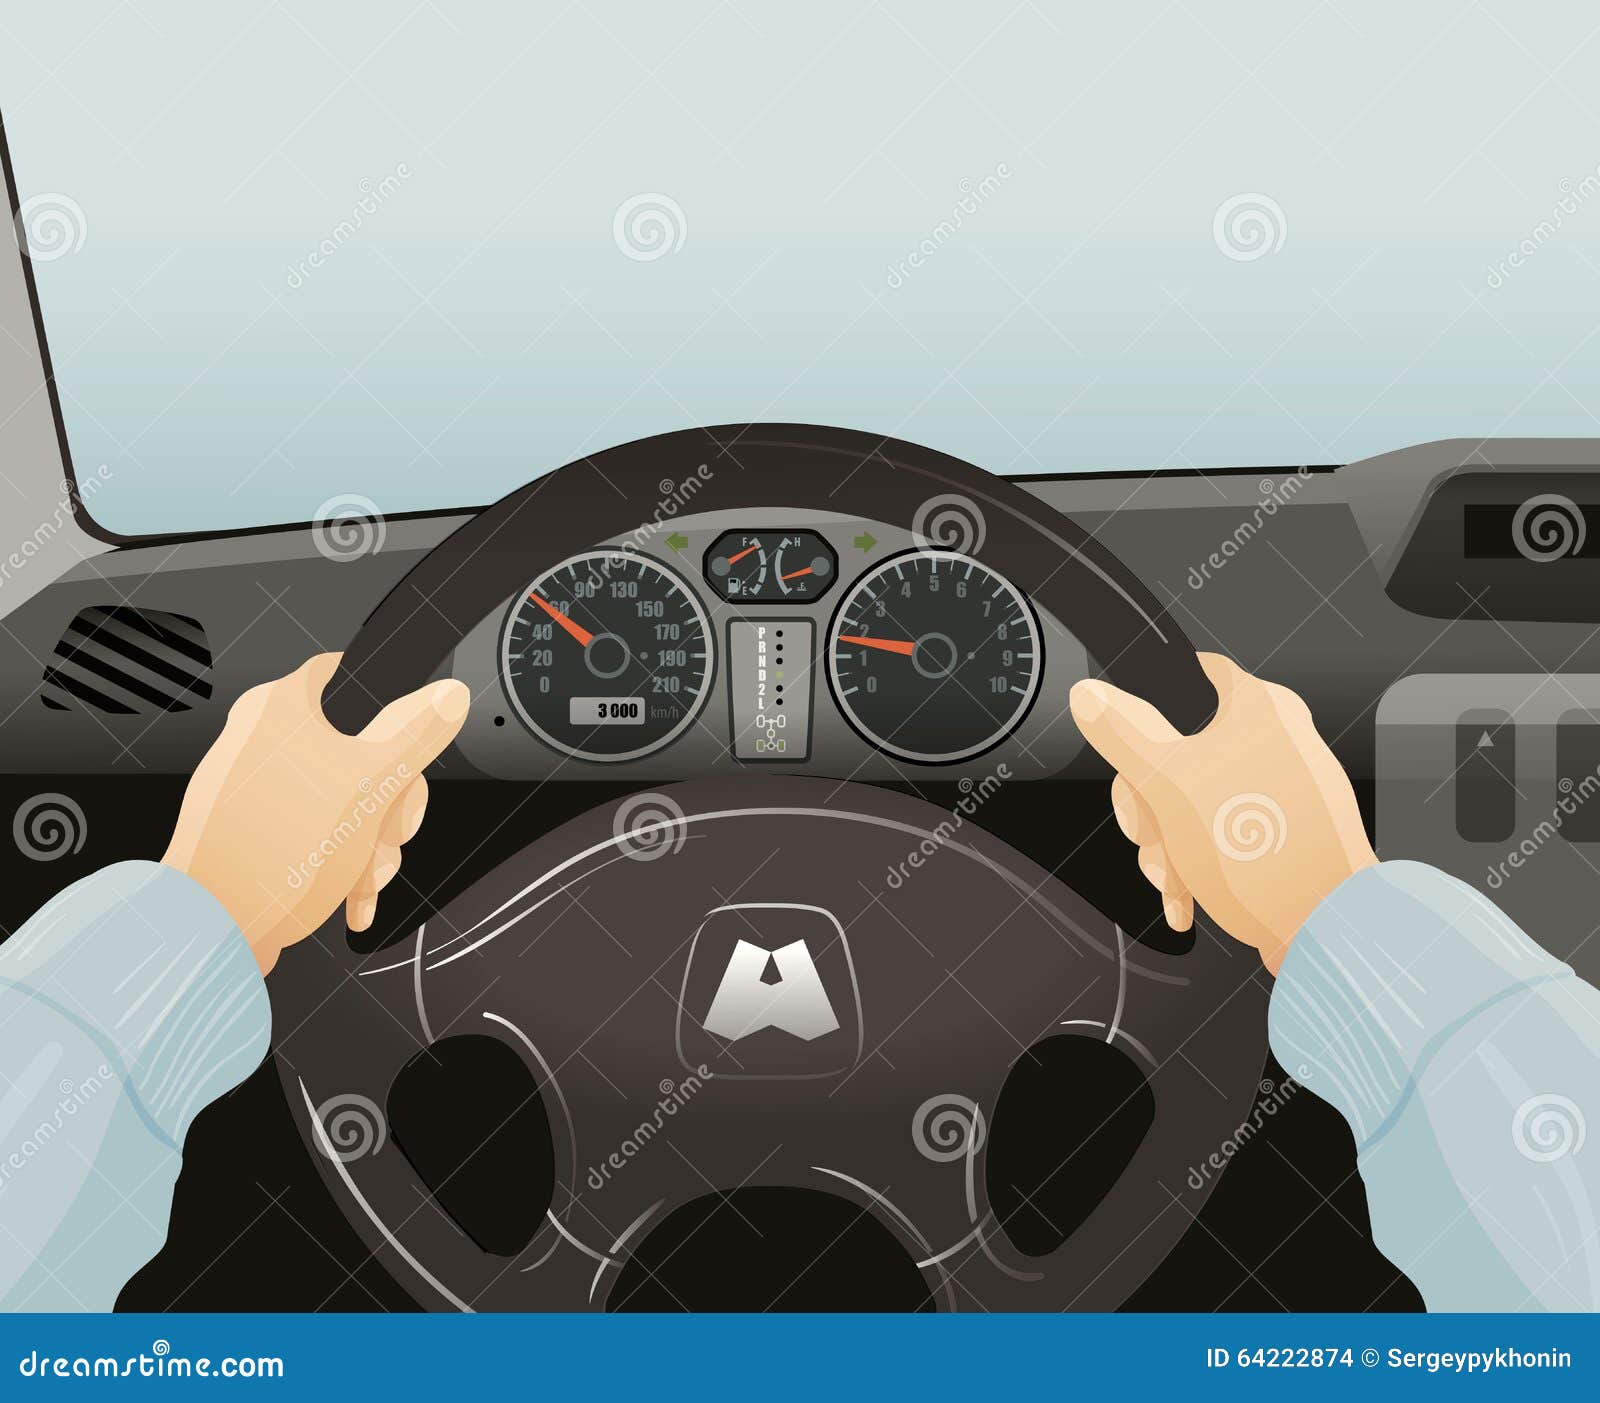 Driving Of A Car. Vector Illustration Stock Vector - Image: 64222874